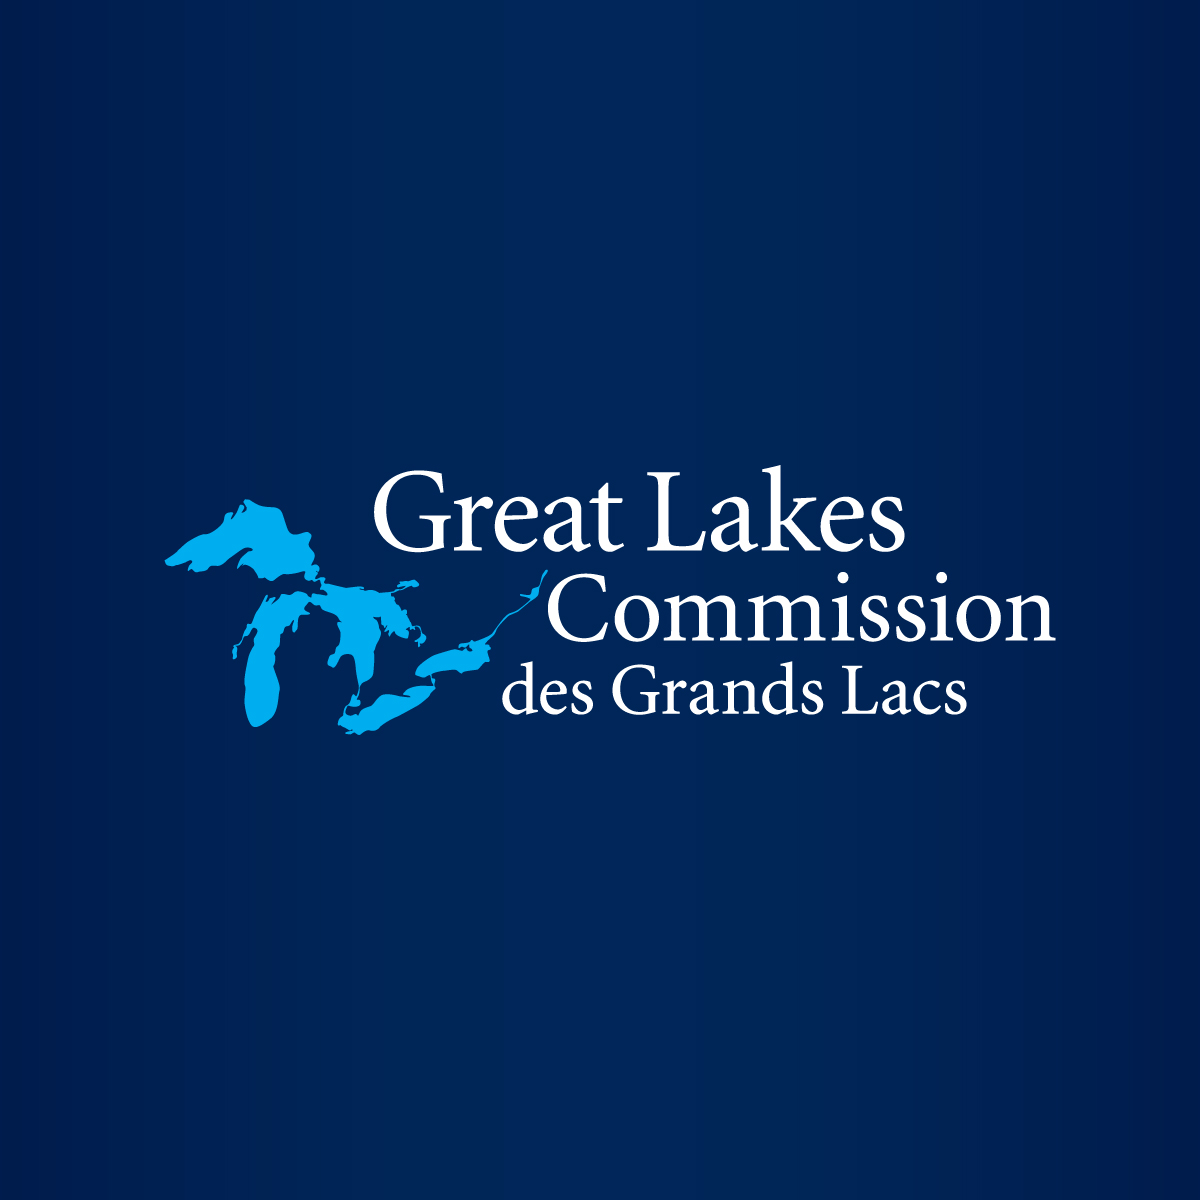 As Great Lakes agreement reaches milestone anniversary, protections as vital as ever